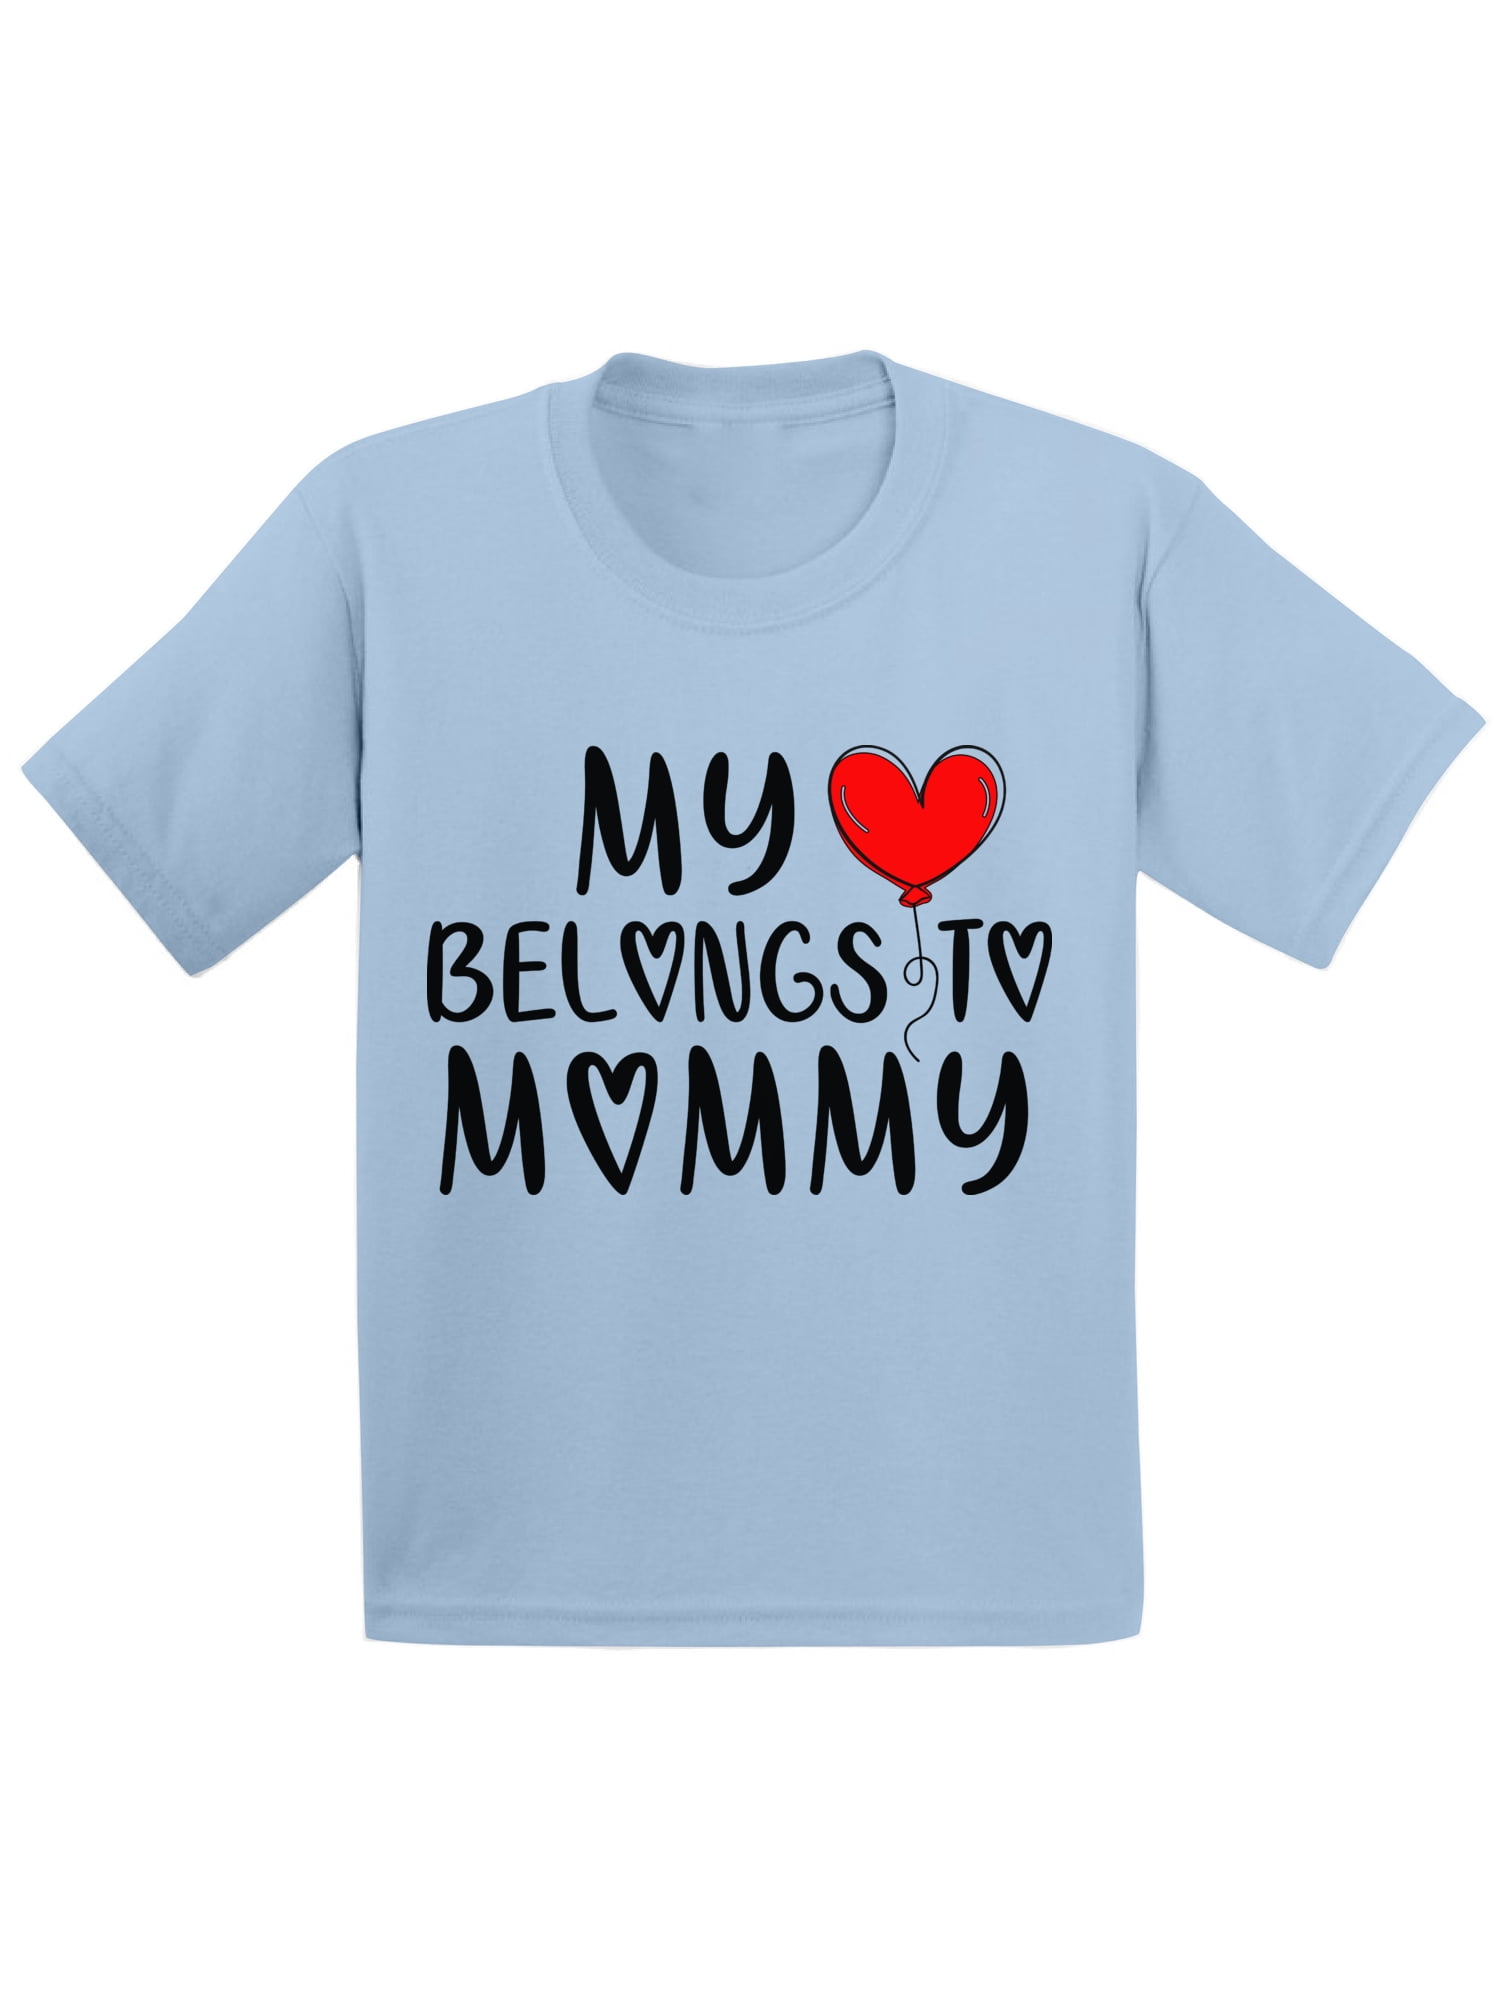 Mom and Son Matching 2t 3t 4t 5t Graphic Tee Boy Girl. Baby or Toddler Mama's Boy Tshirt Valentine's Day for Boy Family Matching